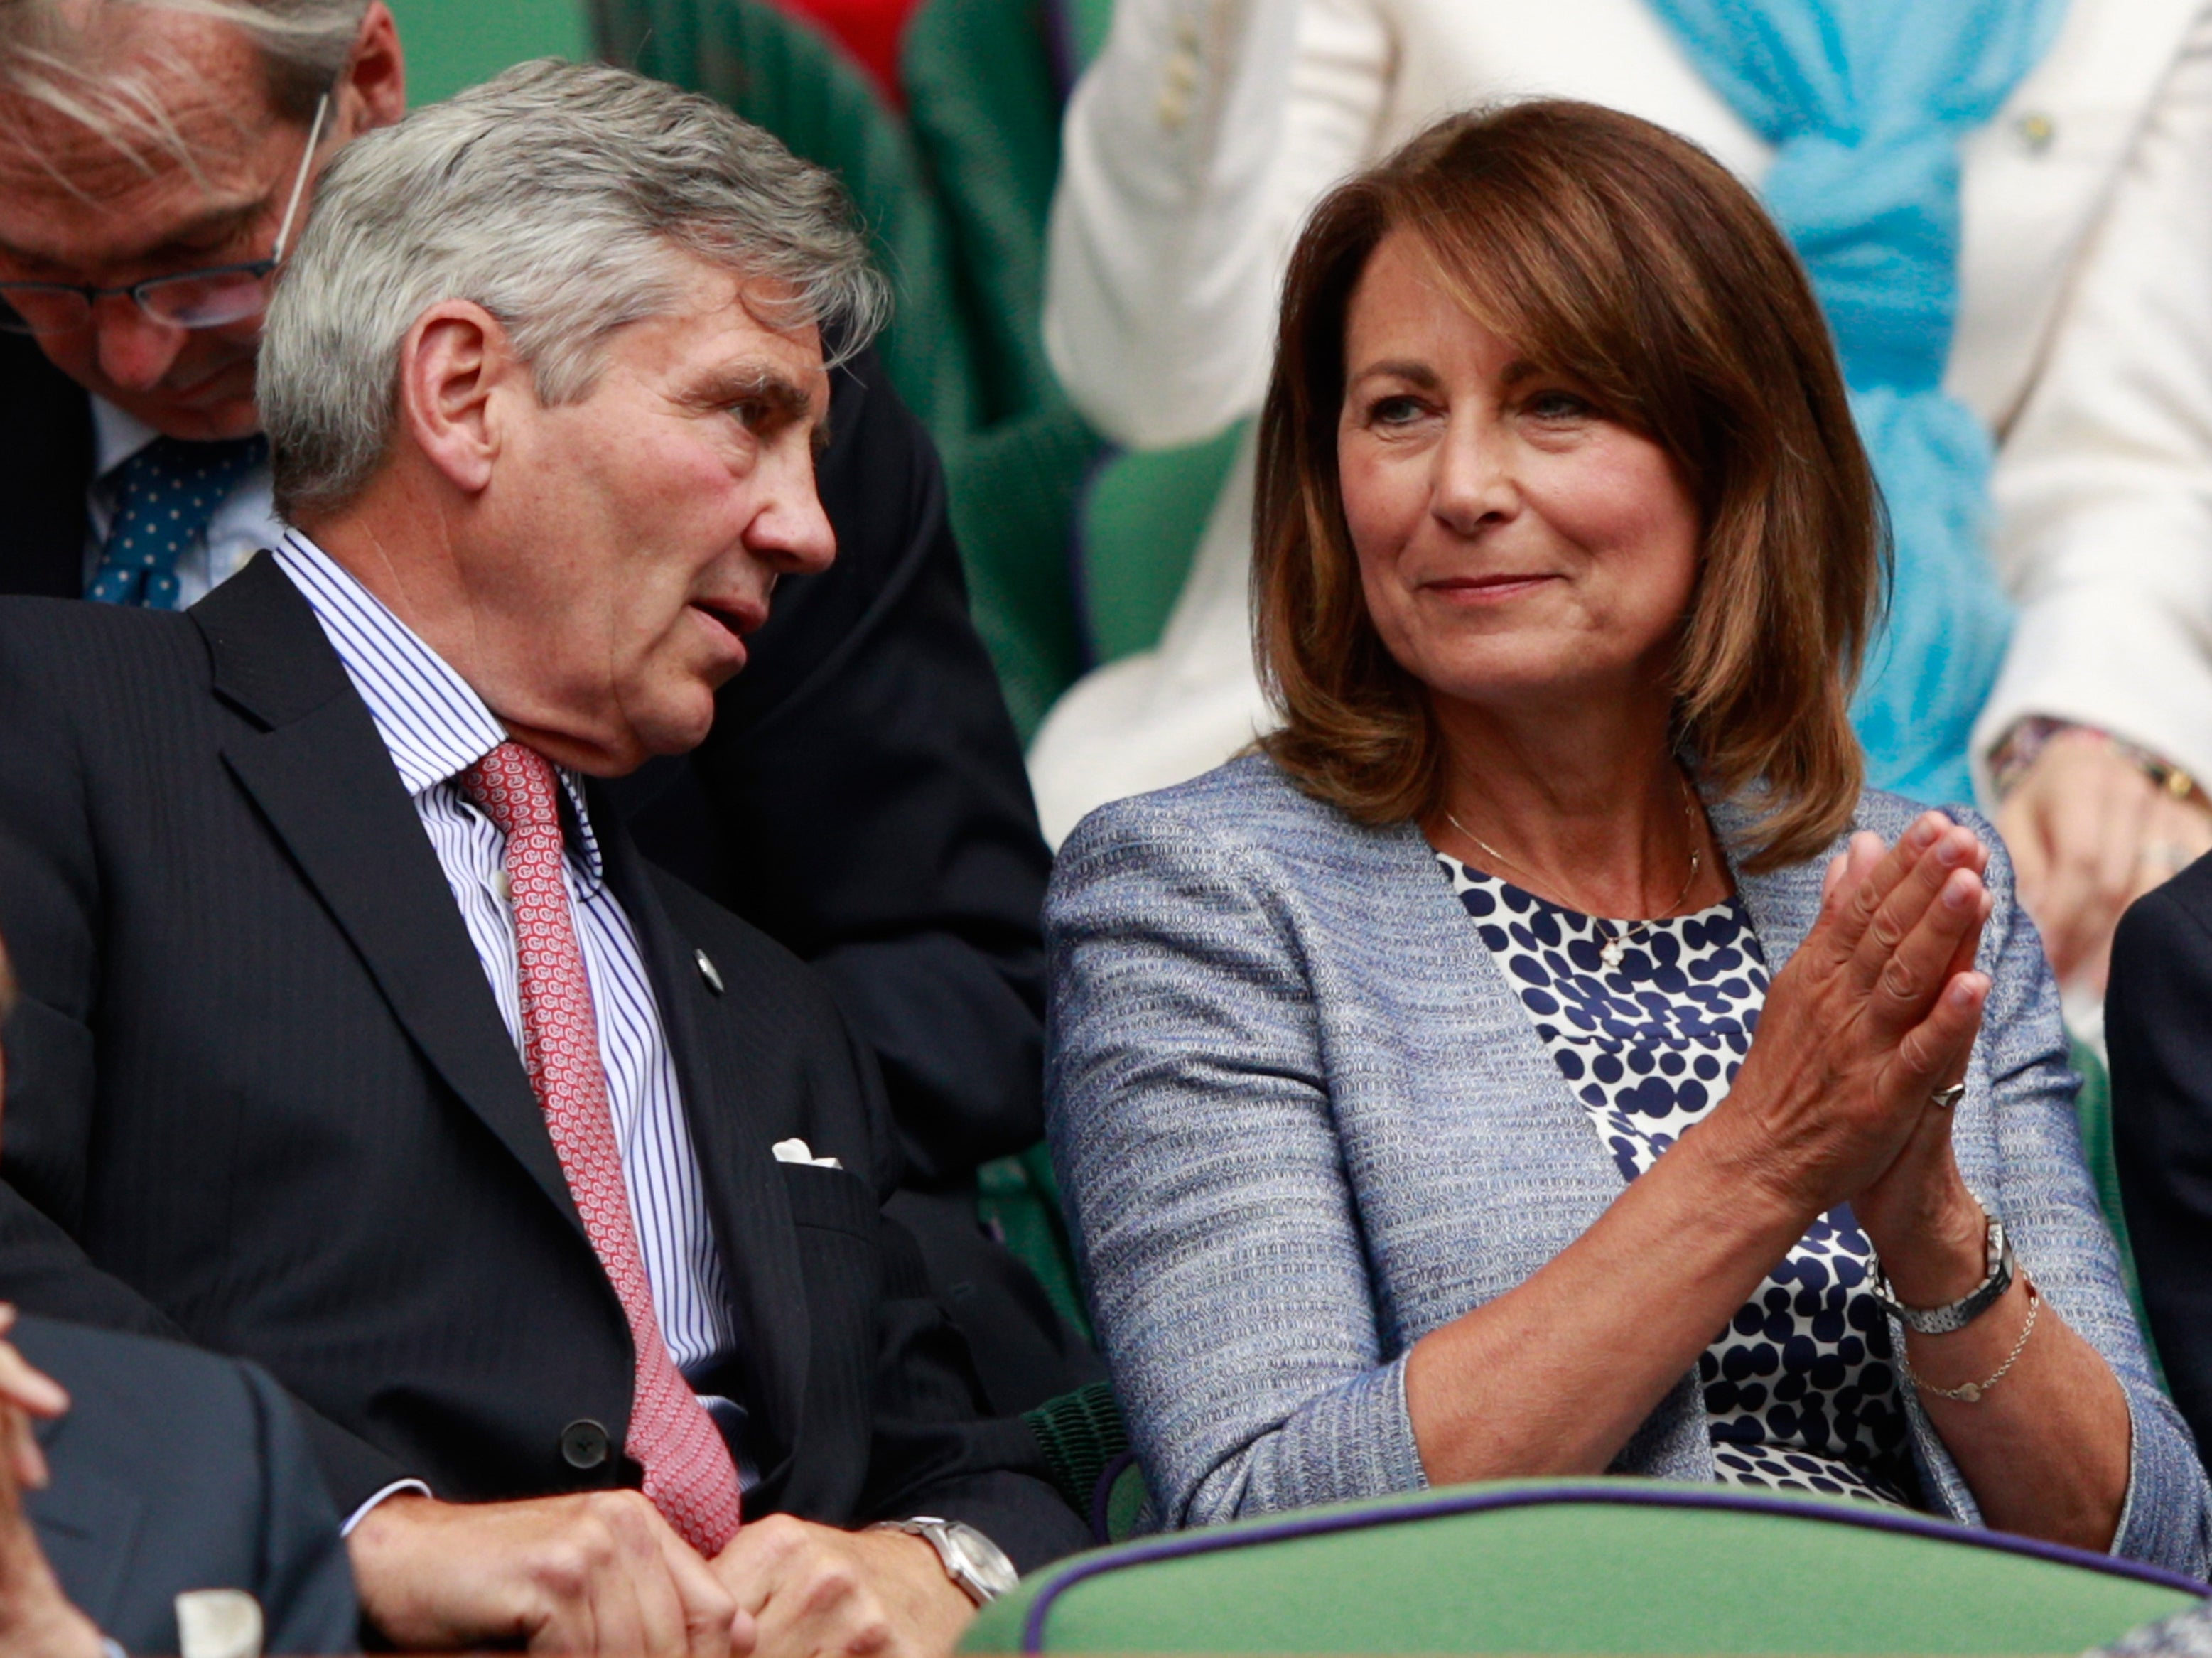 Michael and Carole Middleton at the Wimbledon Lawn Tennis Championships in 2016